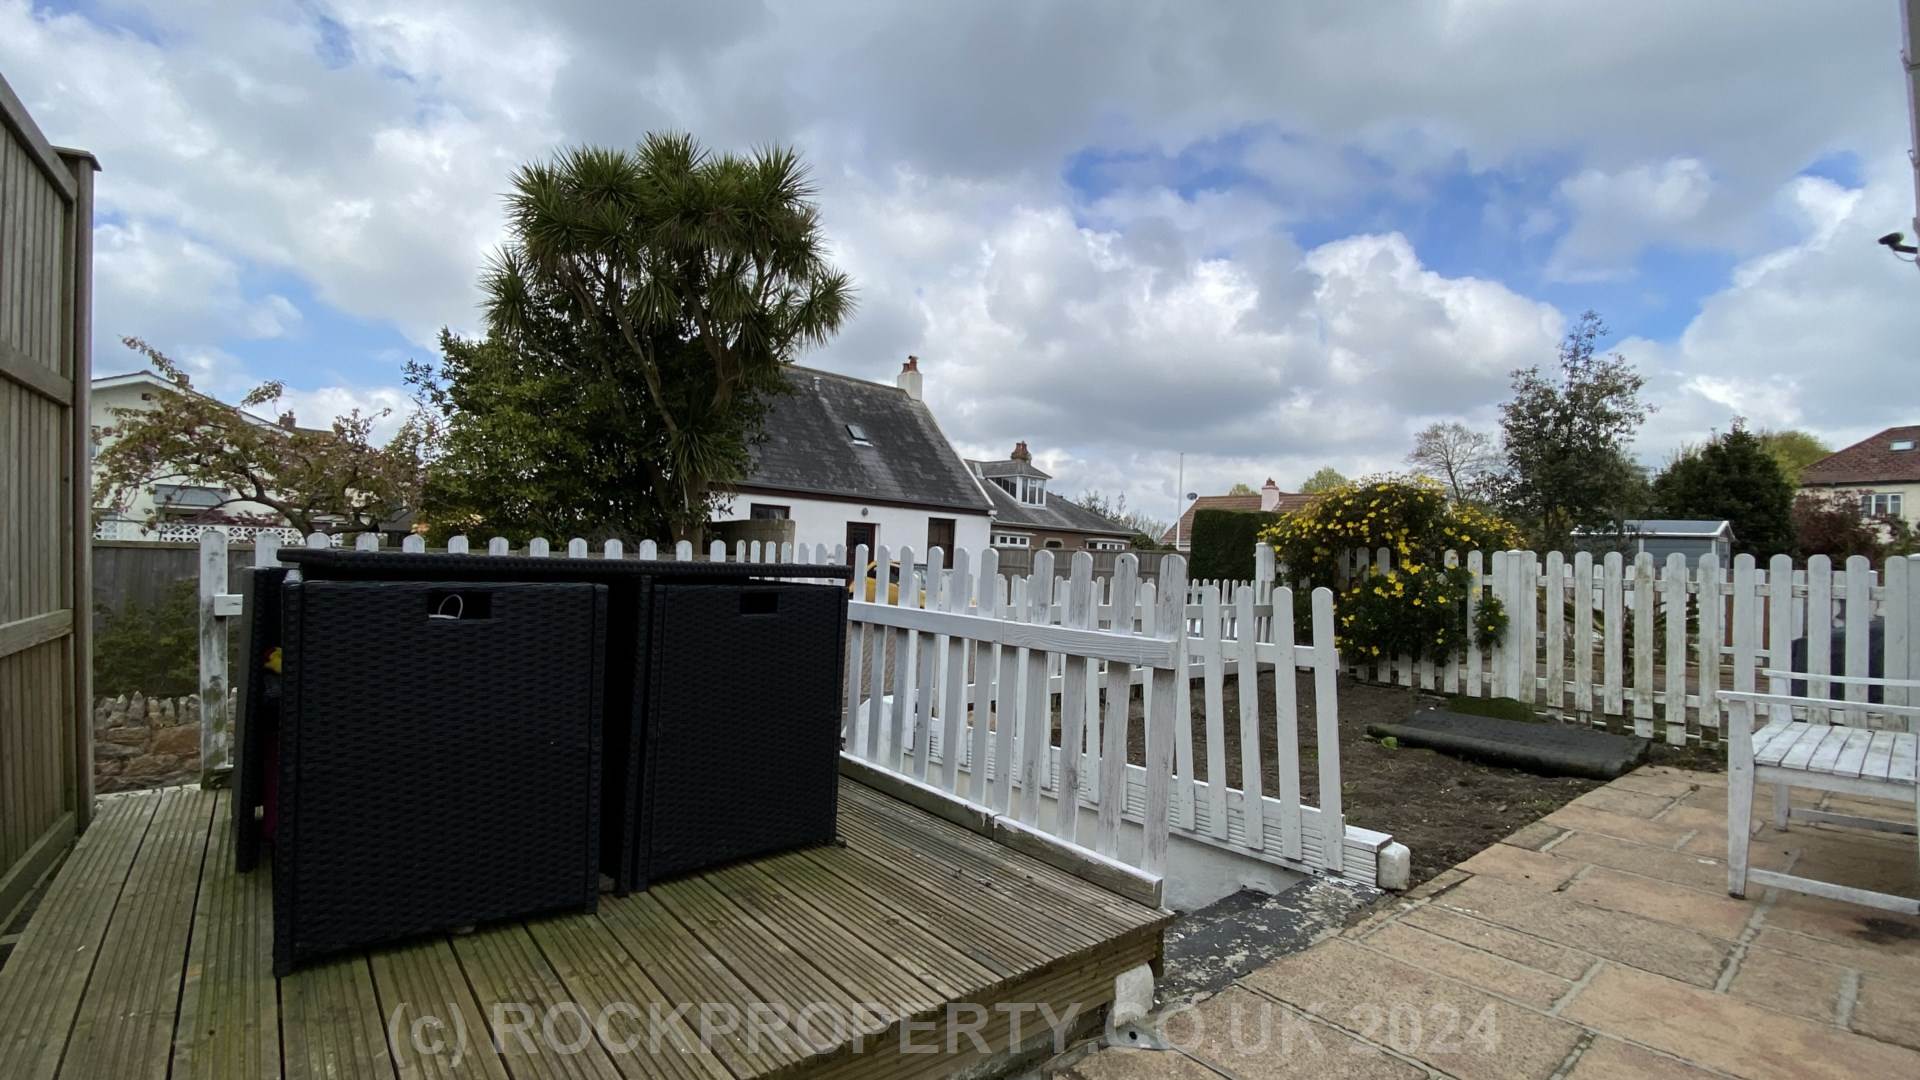 SOLE AGENT - 3 BED FAMILY HOME, La Chasse Brunet, St Saviour, Image 20